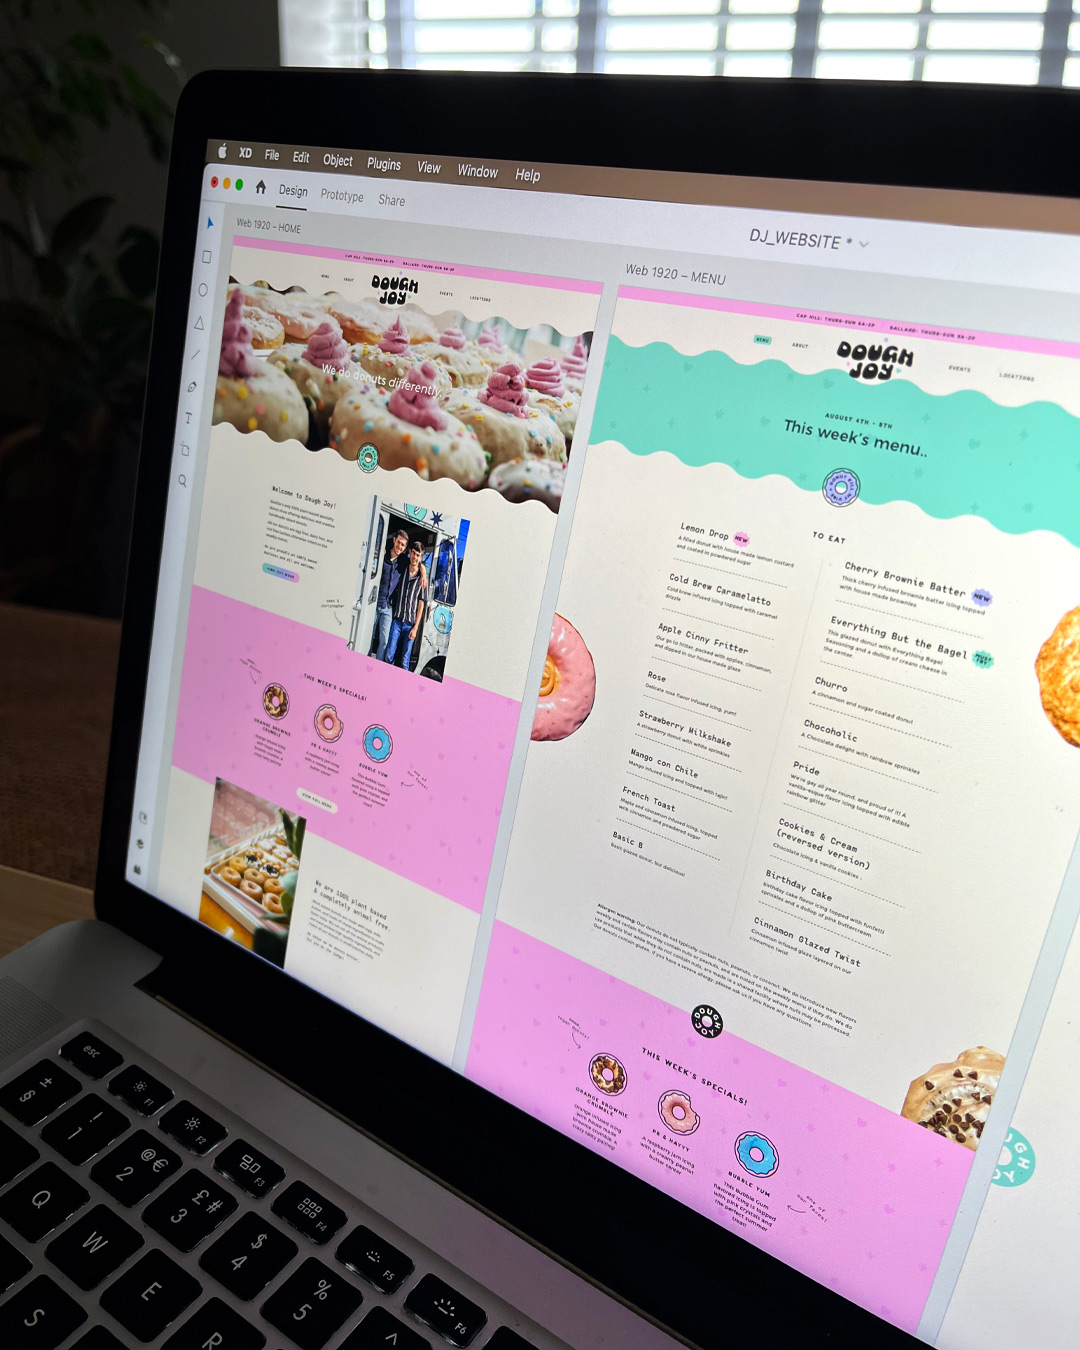 Website design for Dough Joy, a plant-based, yeast-raised donut truck in Seattle - designed by Wiltshire-based graphic designer, Kaye Huett